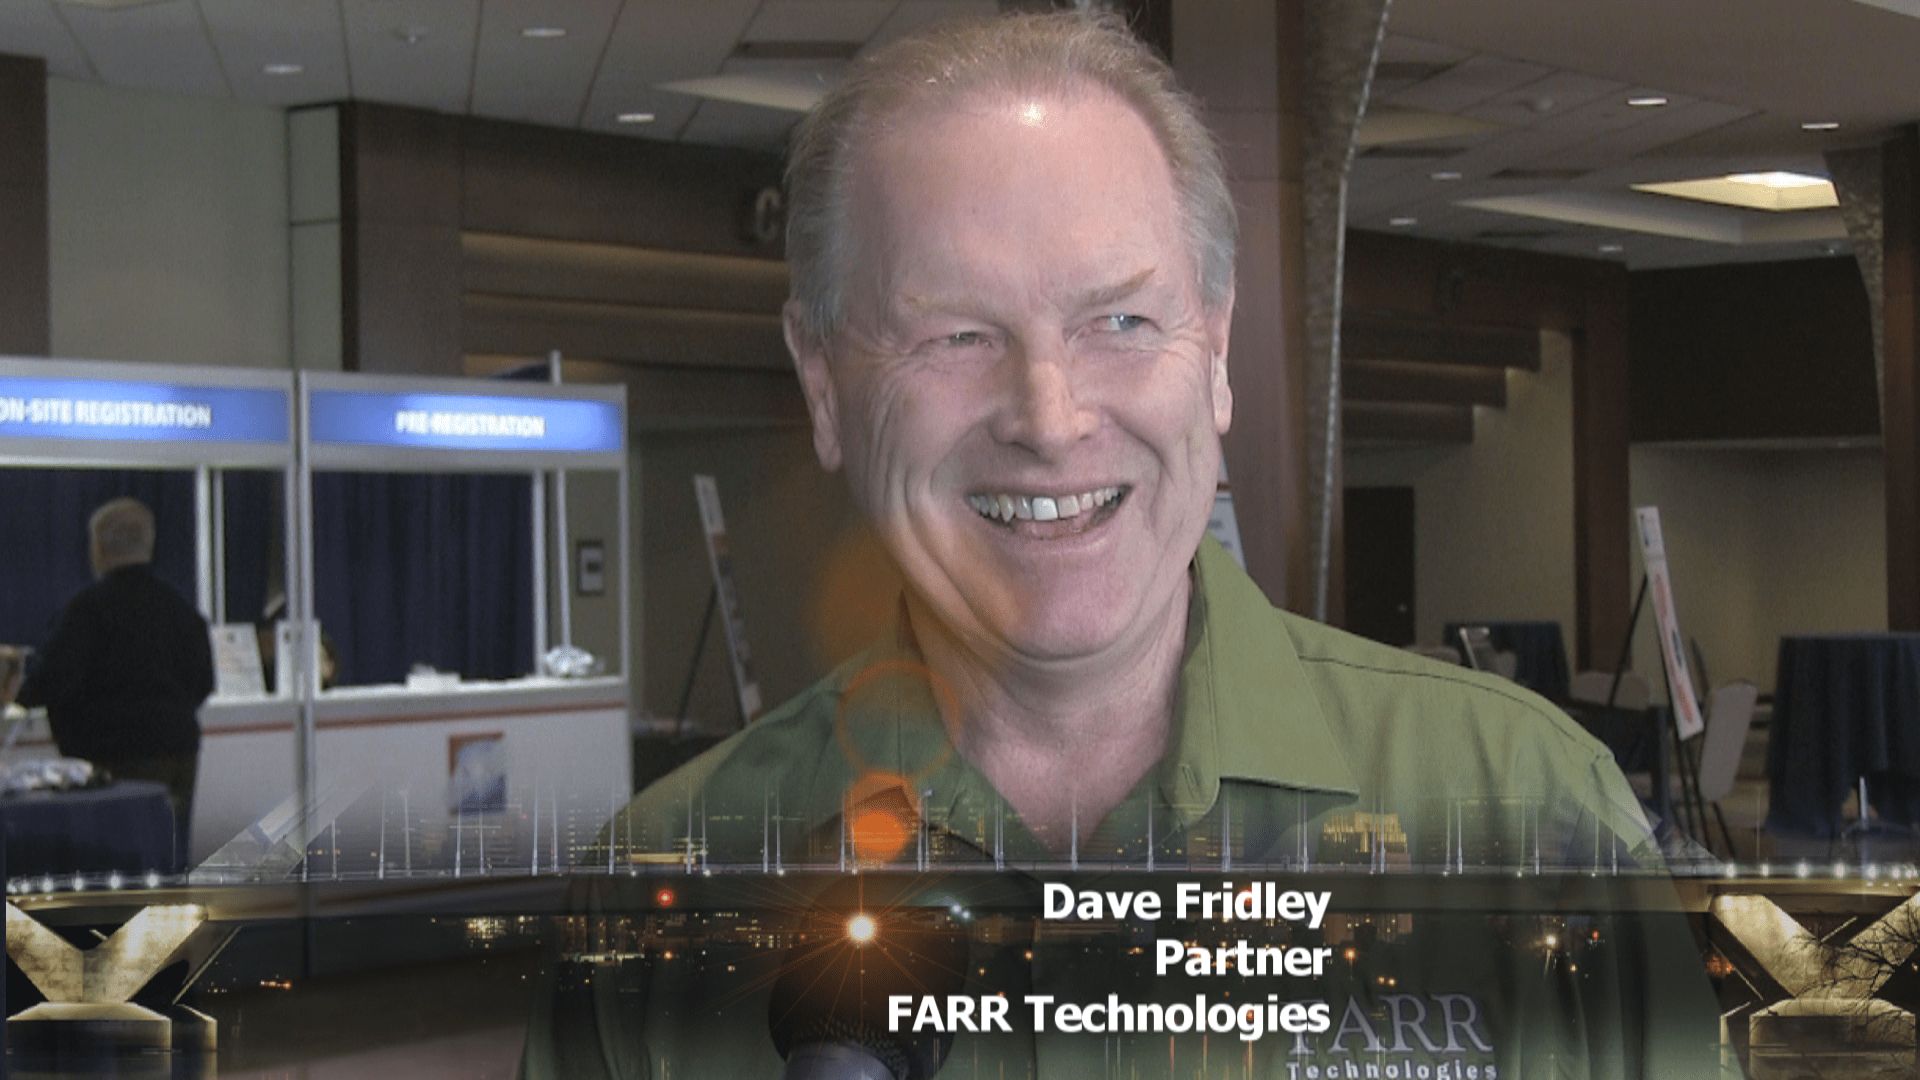 Dave Fridley of FARR Technologies talking about the FCC.